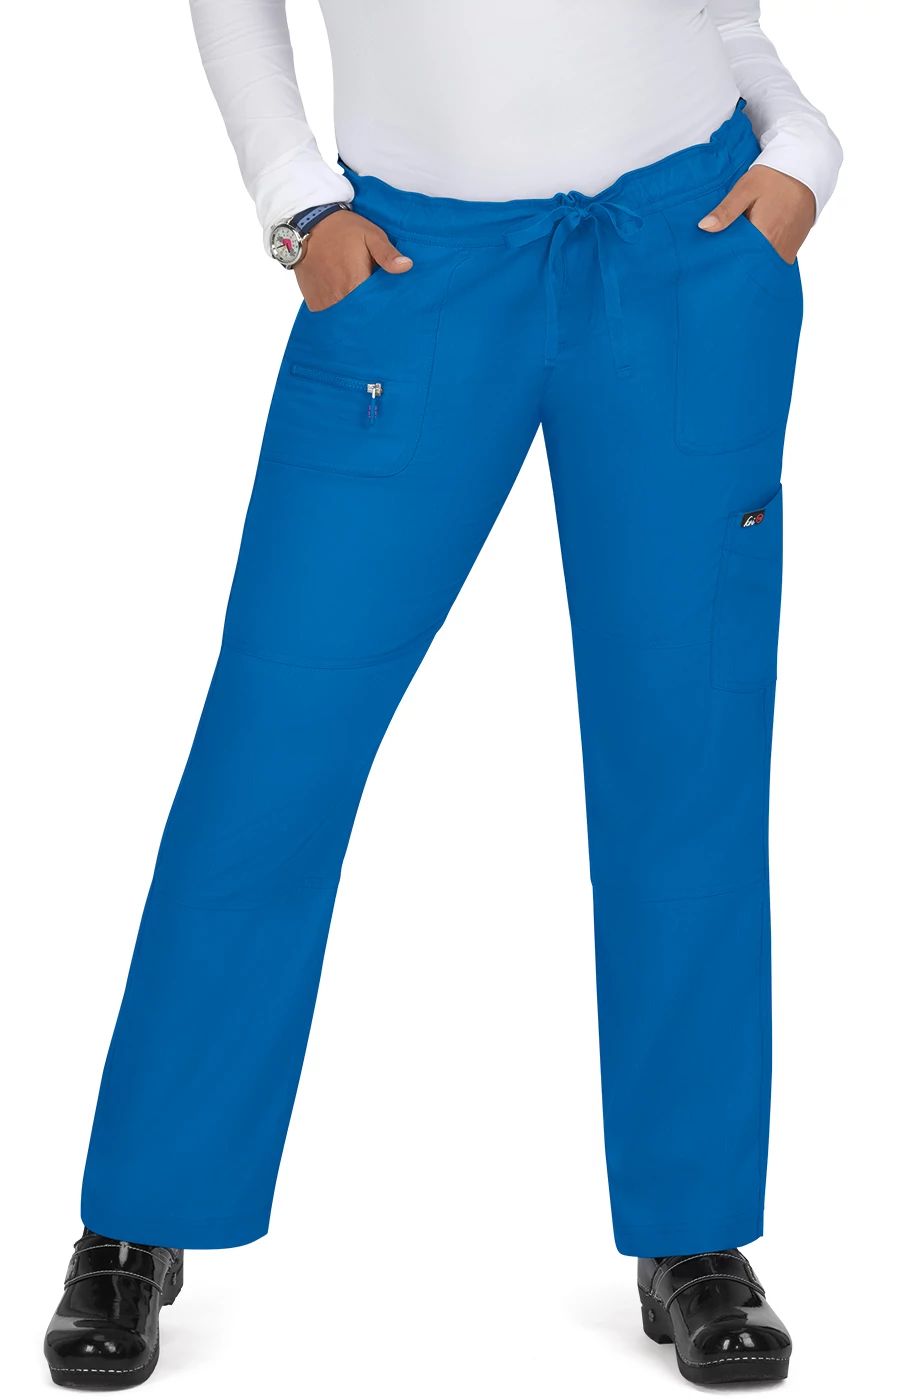 Buy Women's Straight Regular Fit Cotton Silk White, Blue Combo Trousers Pant  Set (L White & Blue) at Amazon.in